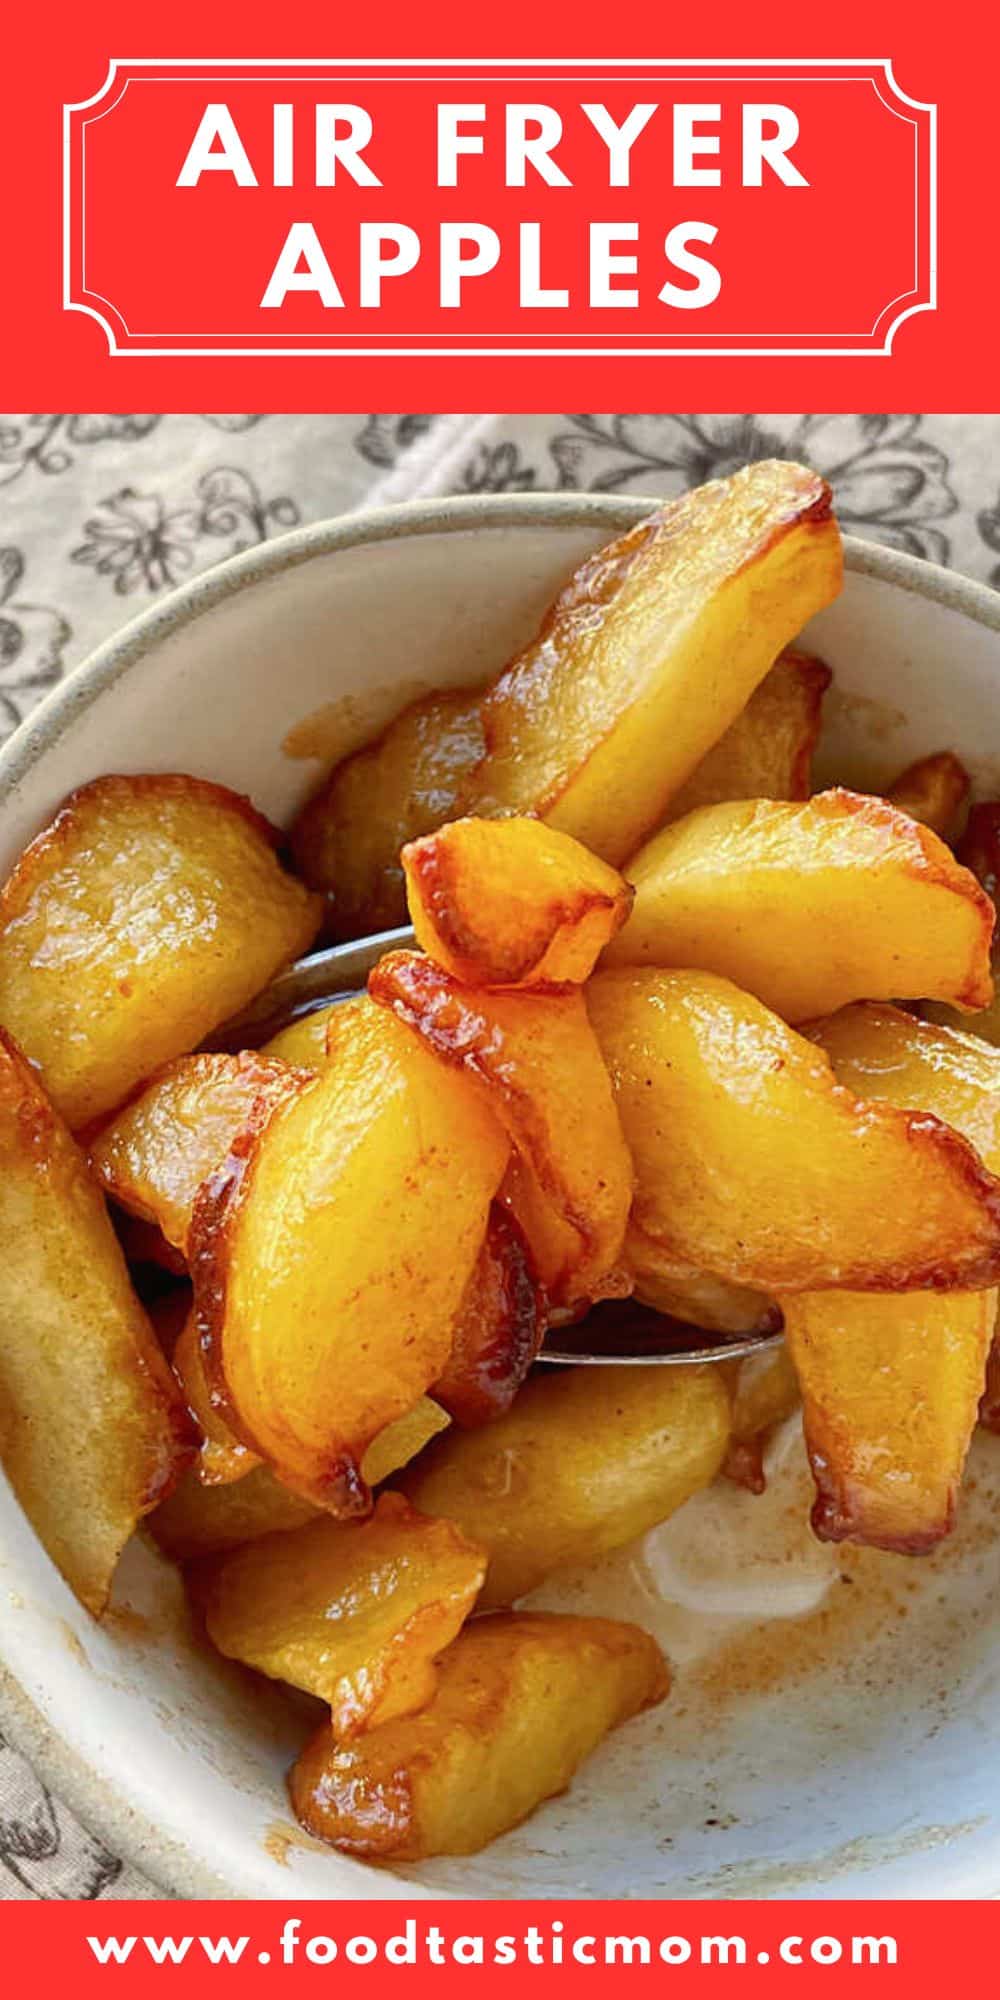 These Air Fryer Apples taste like those Cracker Barrel fried apples. The air fryer makes the apple slices tender and a simple sauce make them irresistible.  via @foodtasticmom